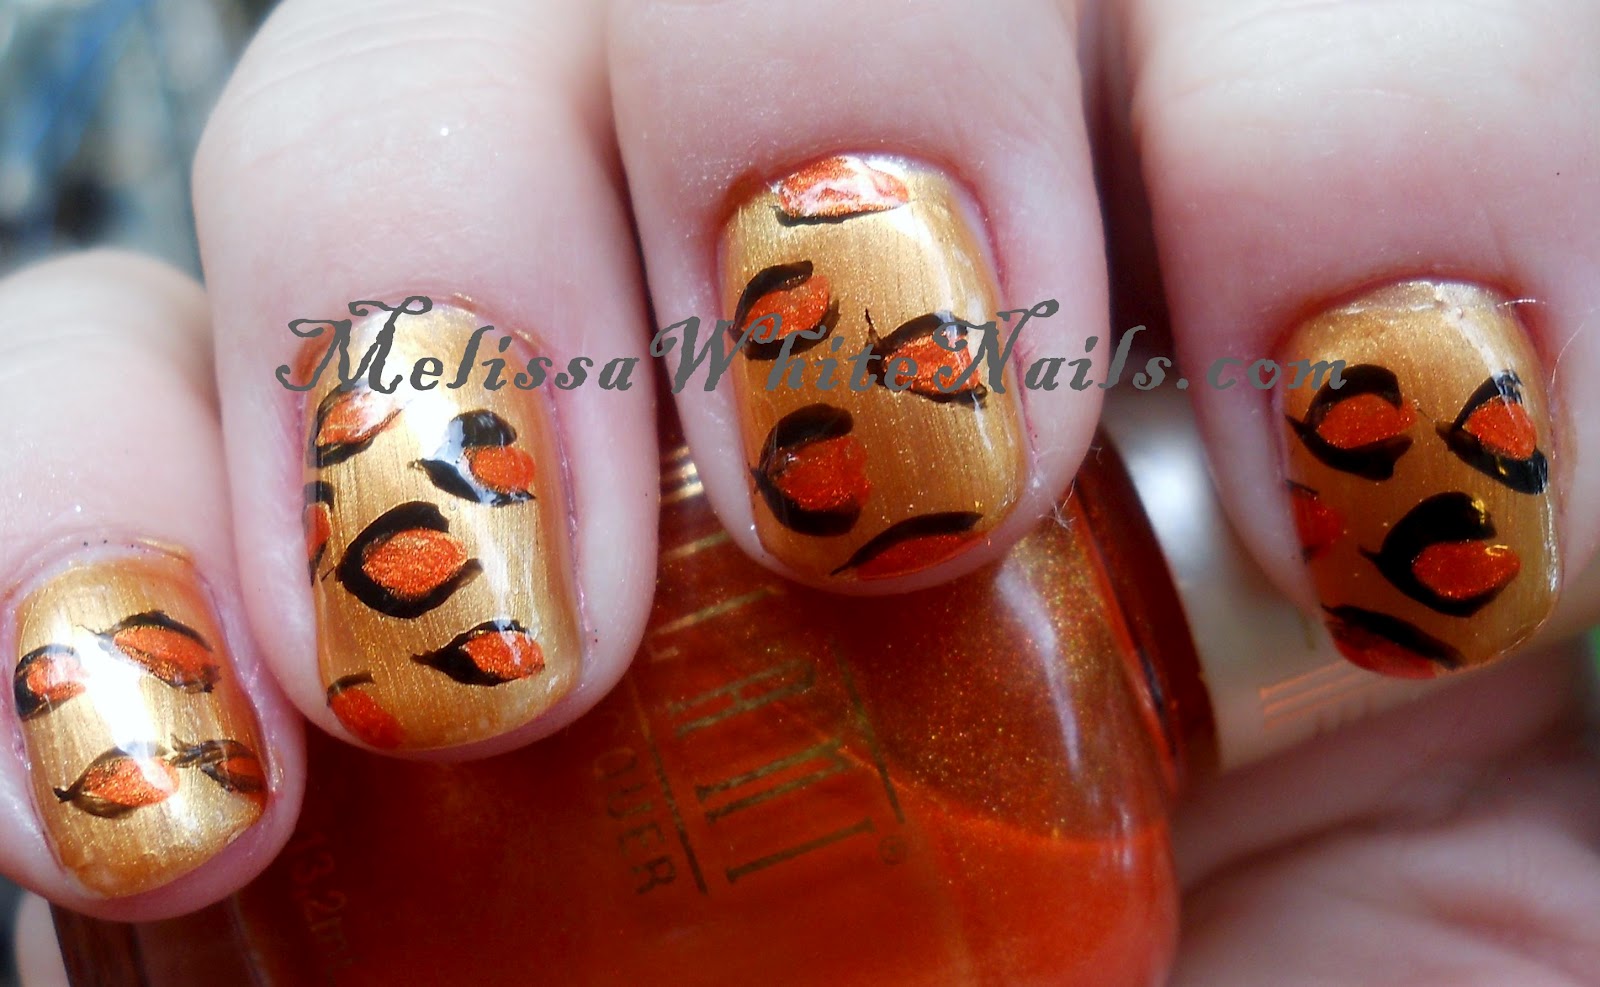 Adventures of a Nail Tech: January 2012